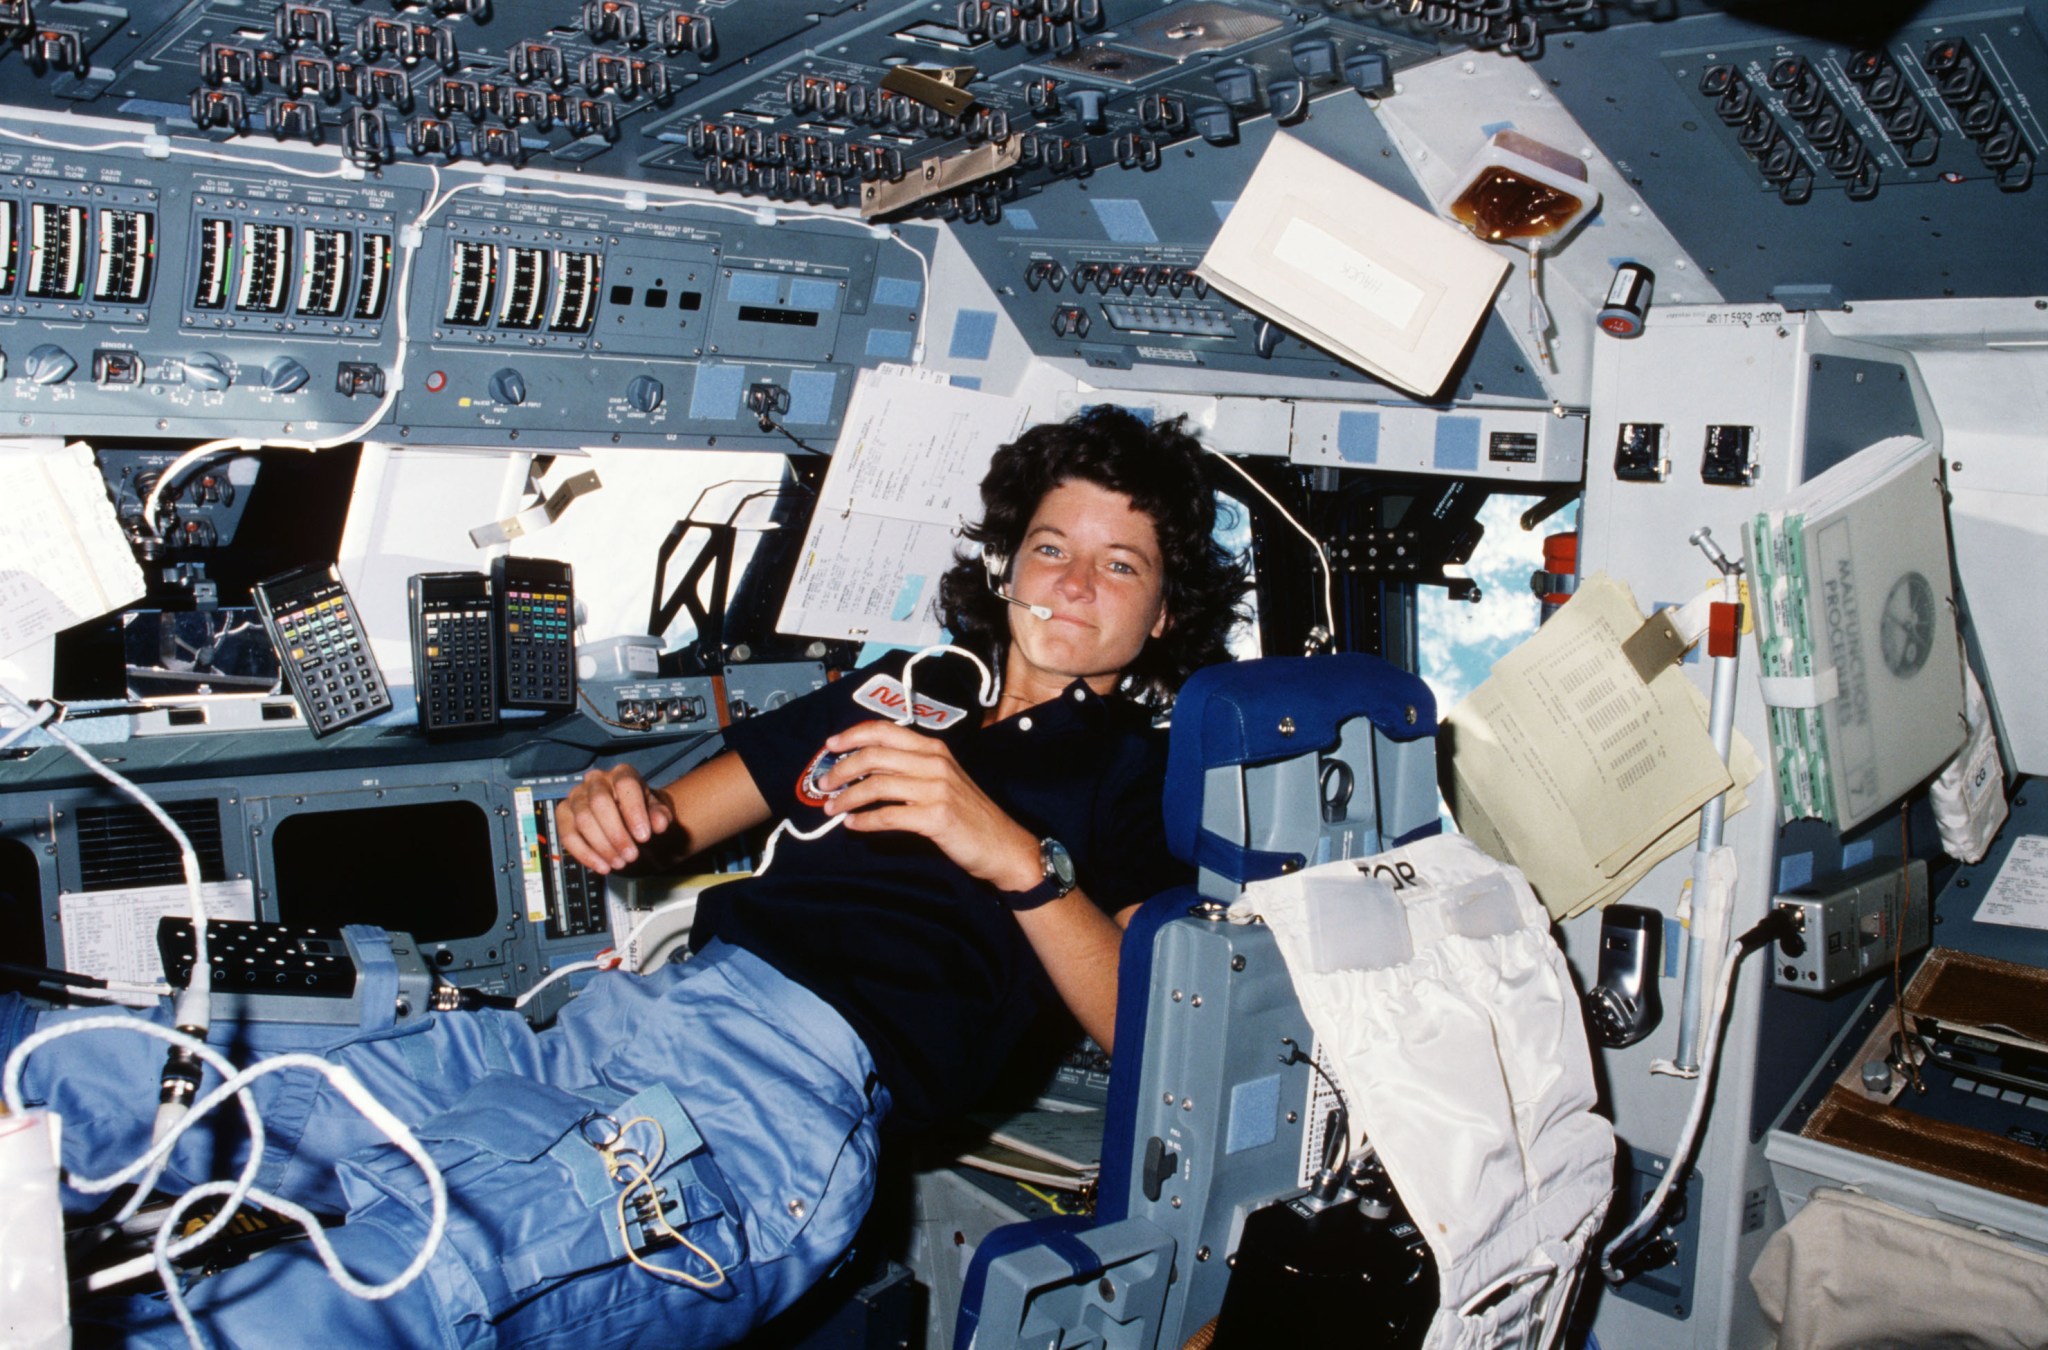 Photo of Sally Ride on space shuttle Challenger on the STS-7 mission. She was the first female U.S. astronaut.